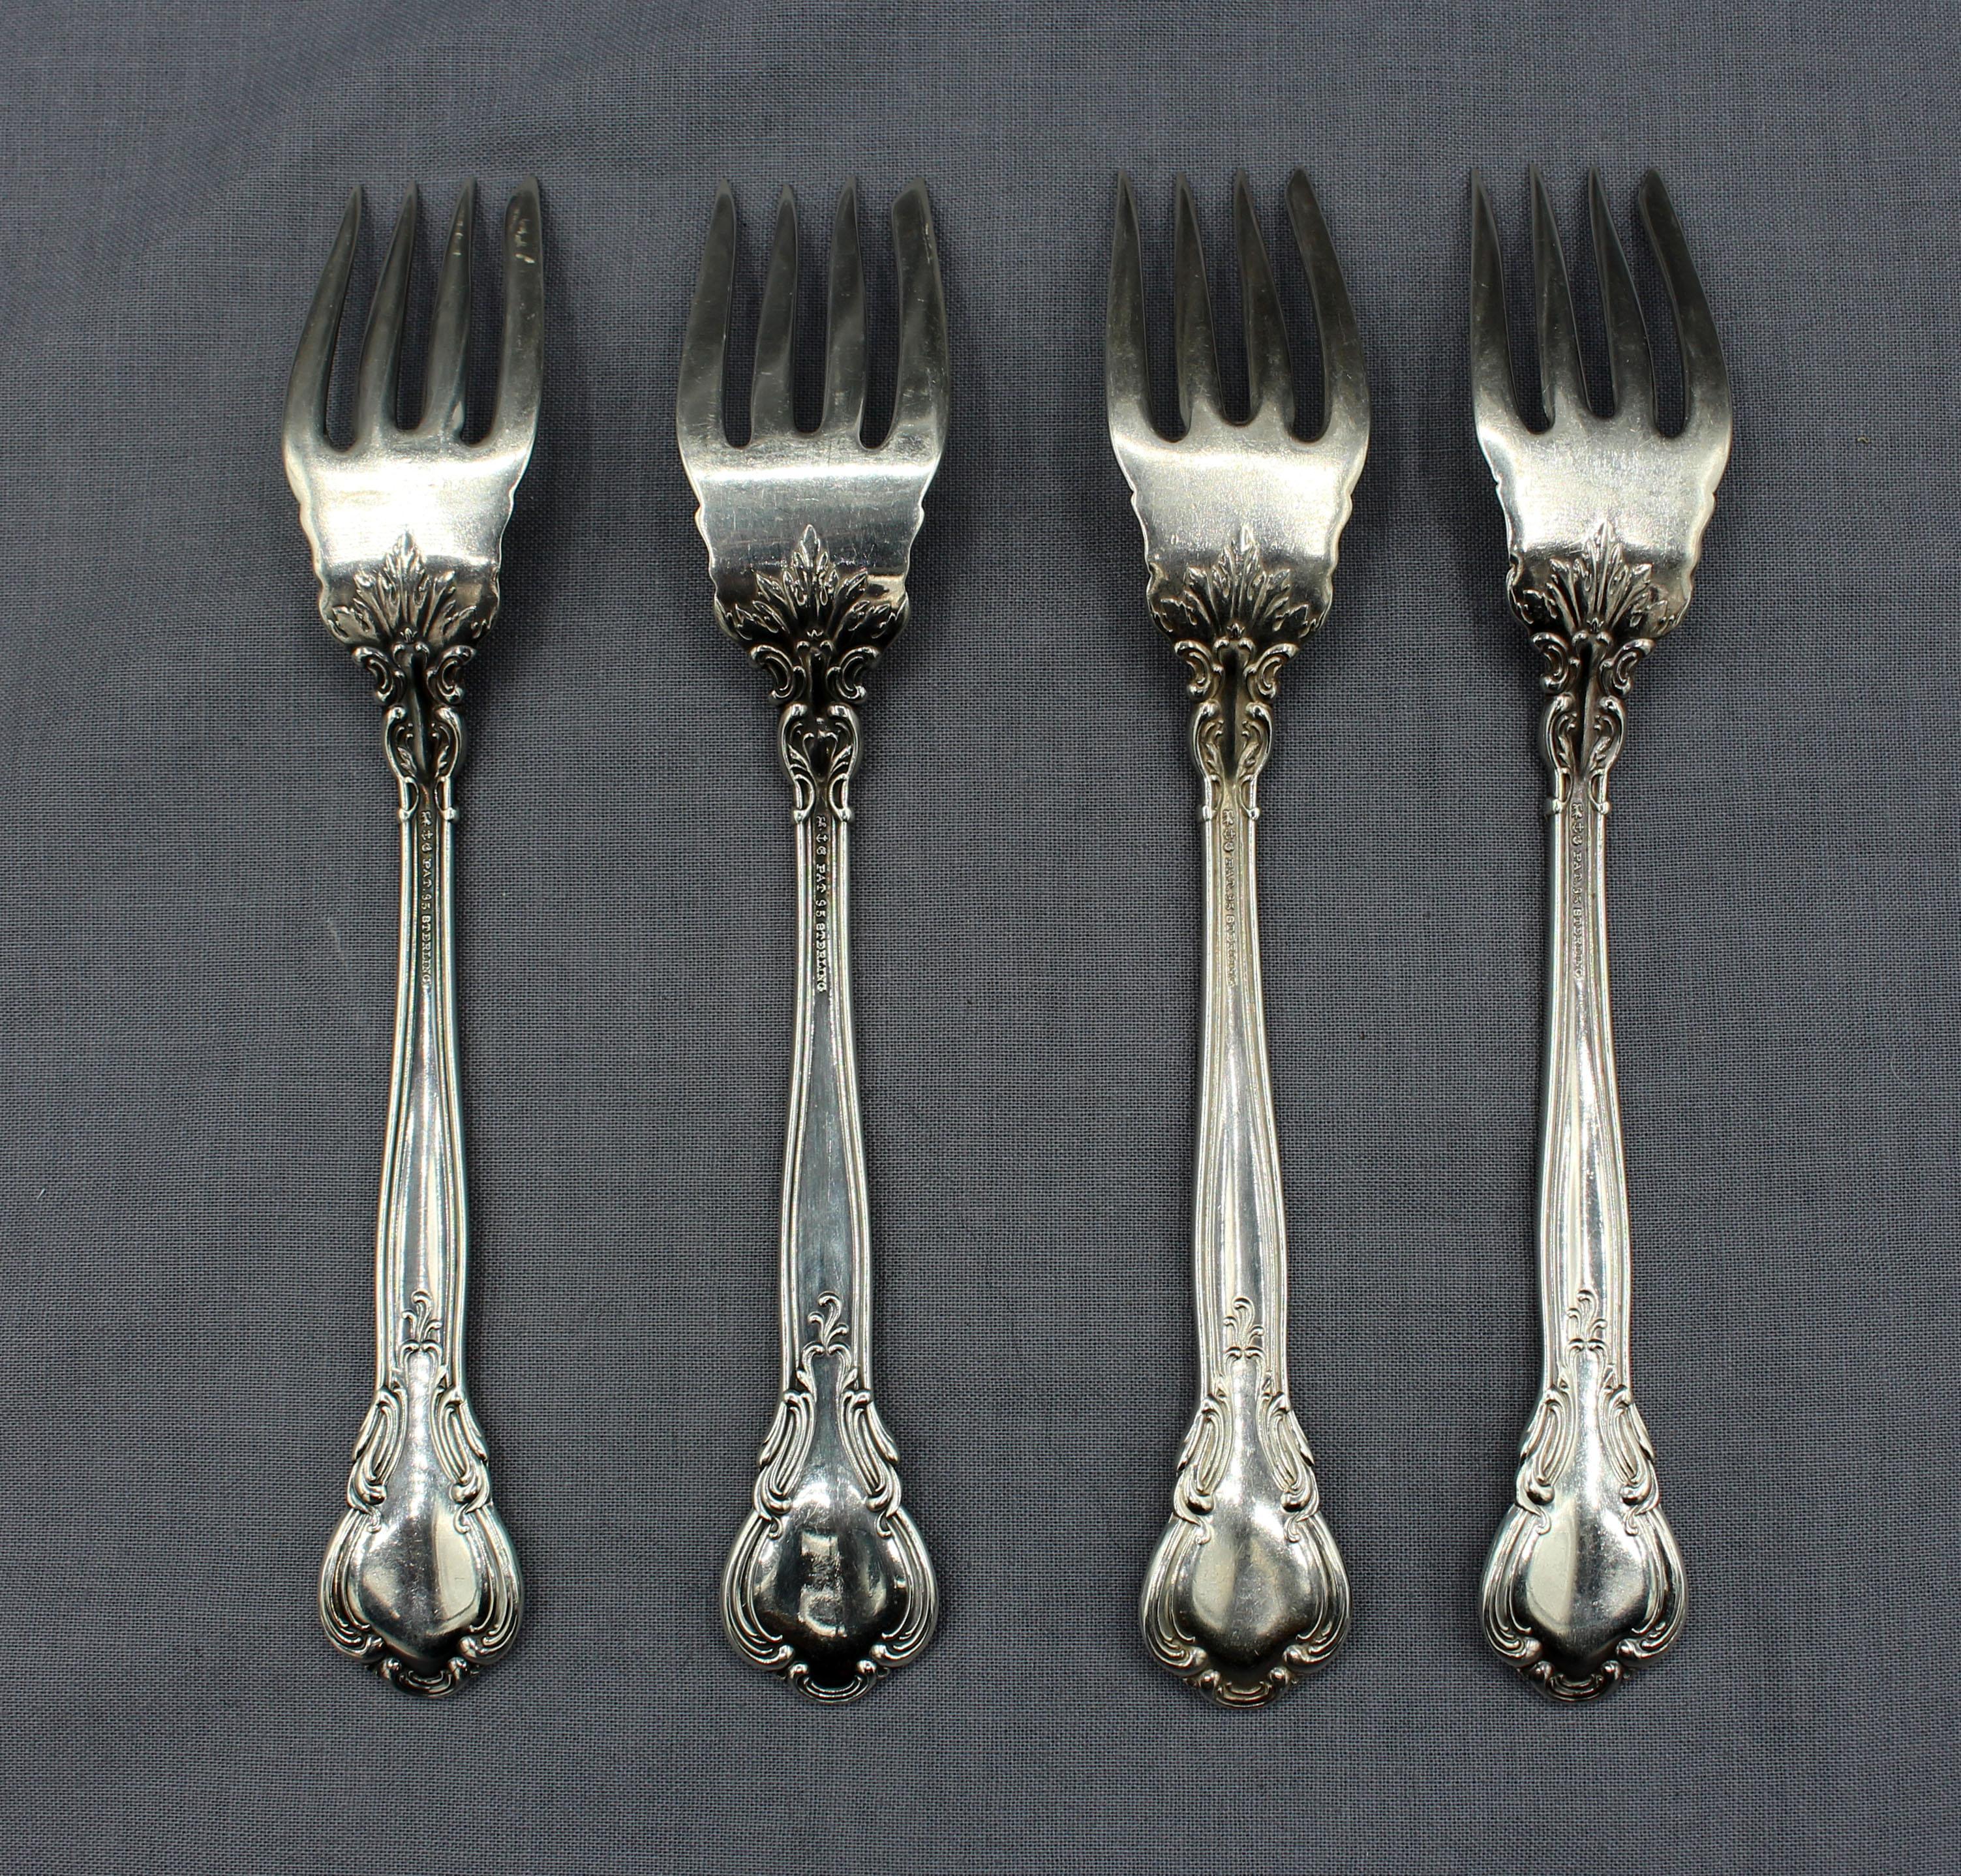 Set of 4 Chantilly sterling silver small fish forks by Gorham, 1895-1950. Monogram 